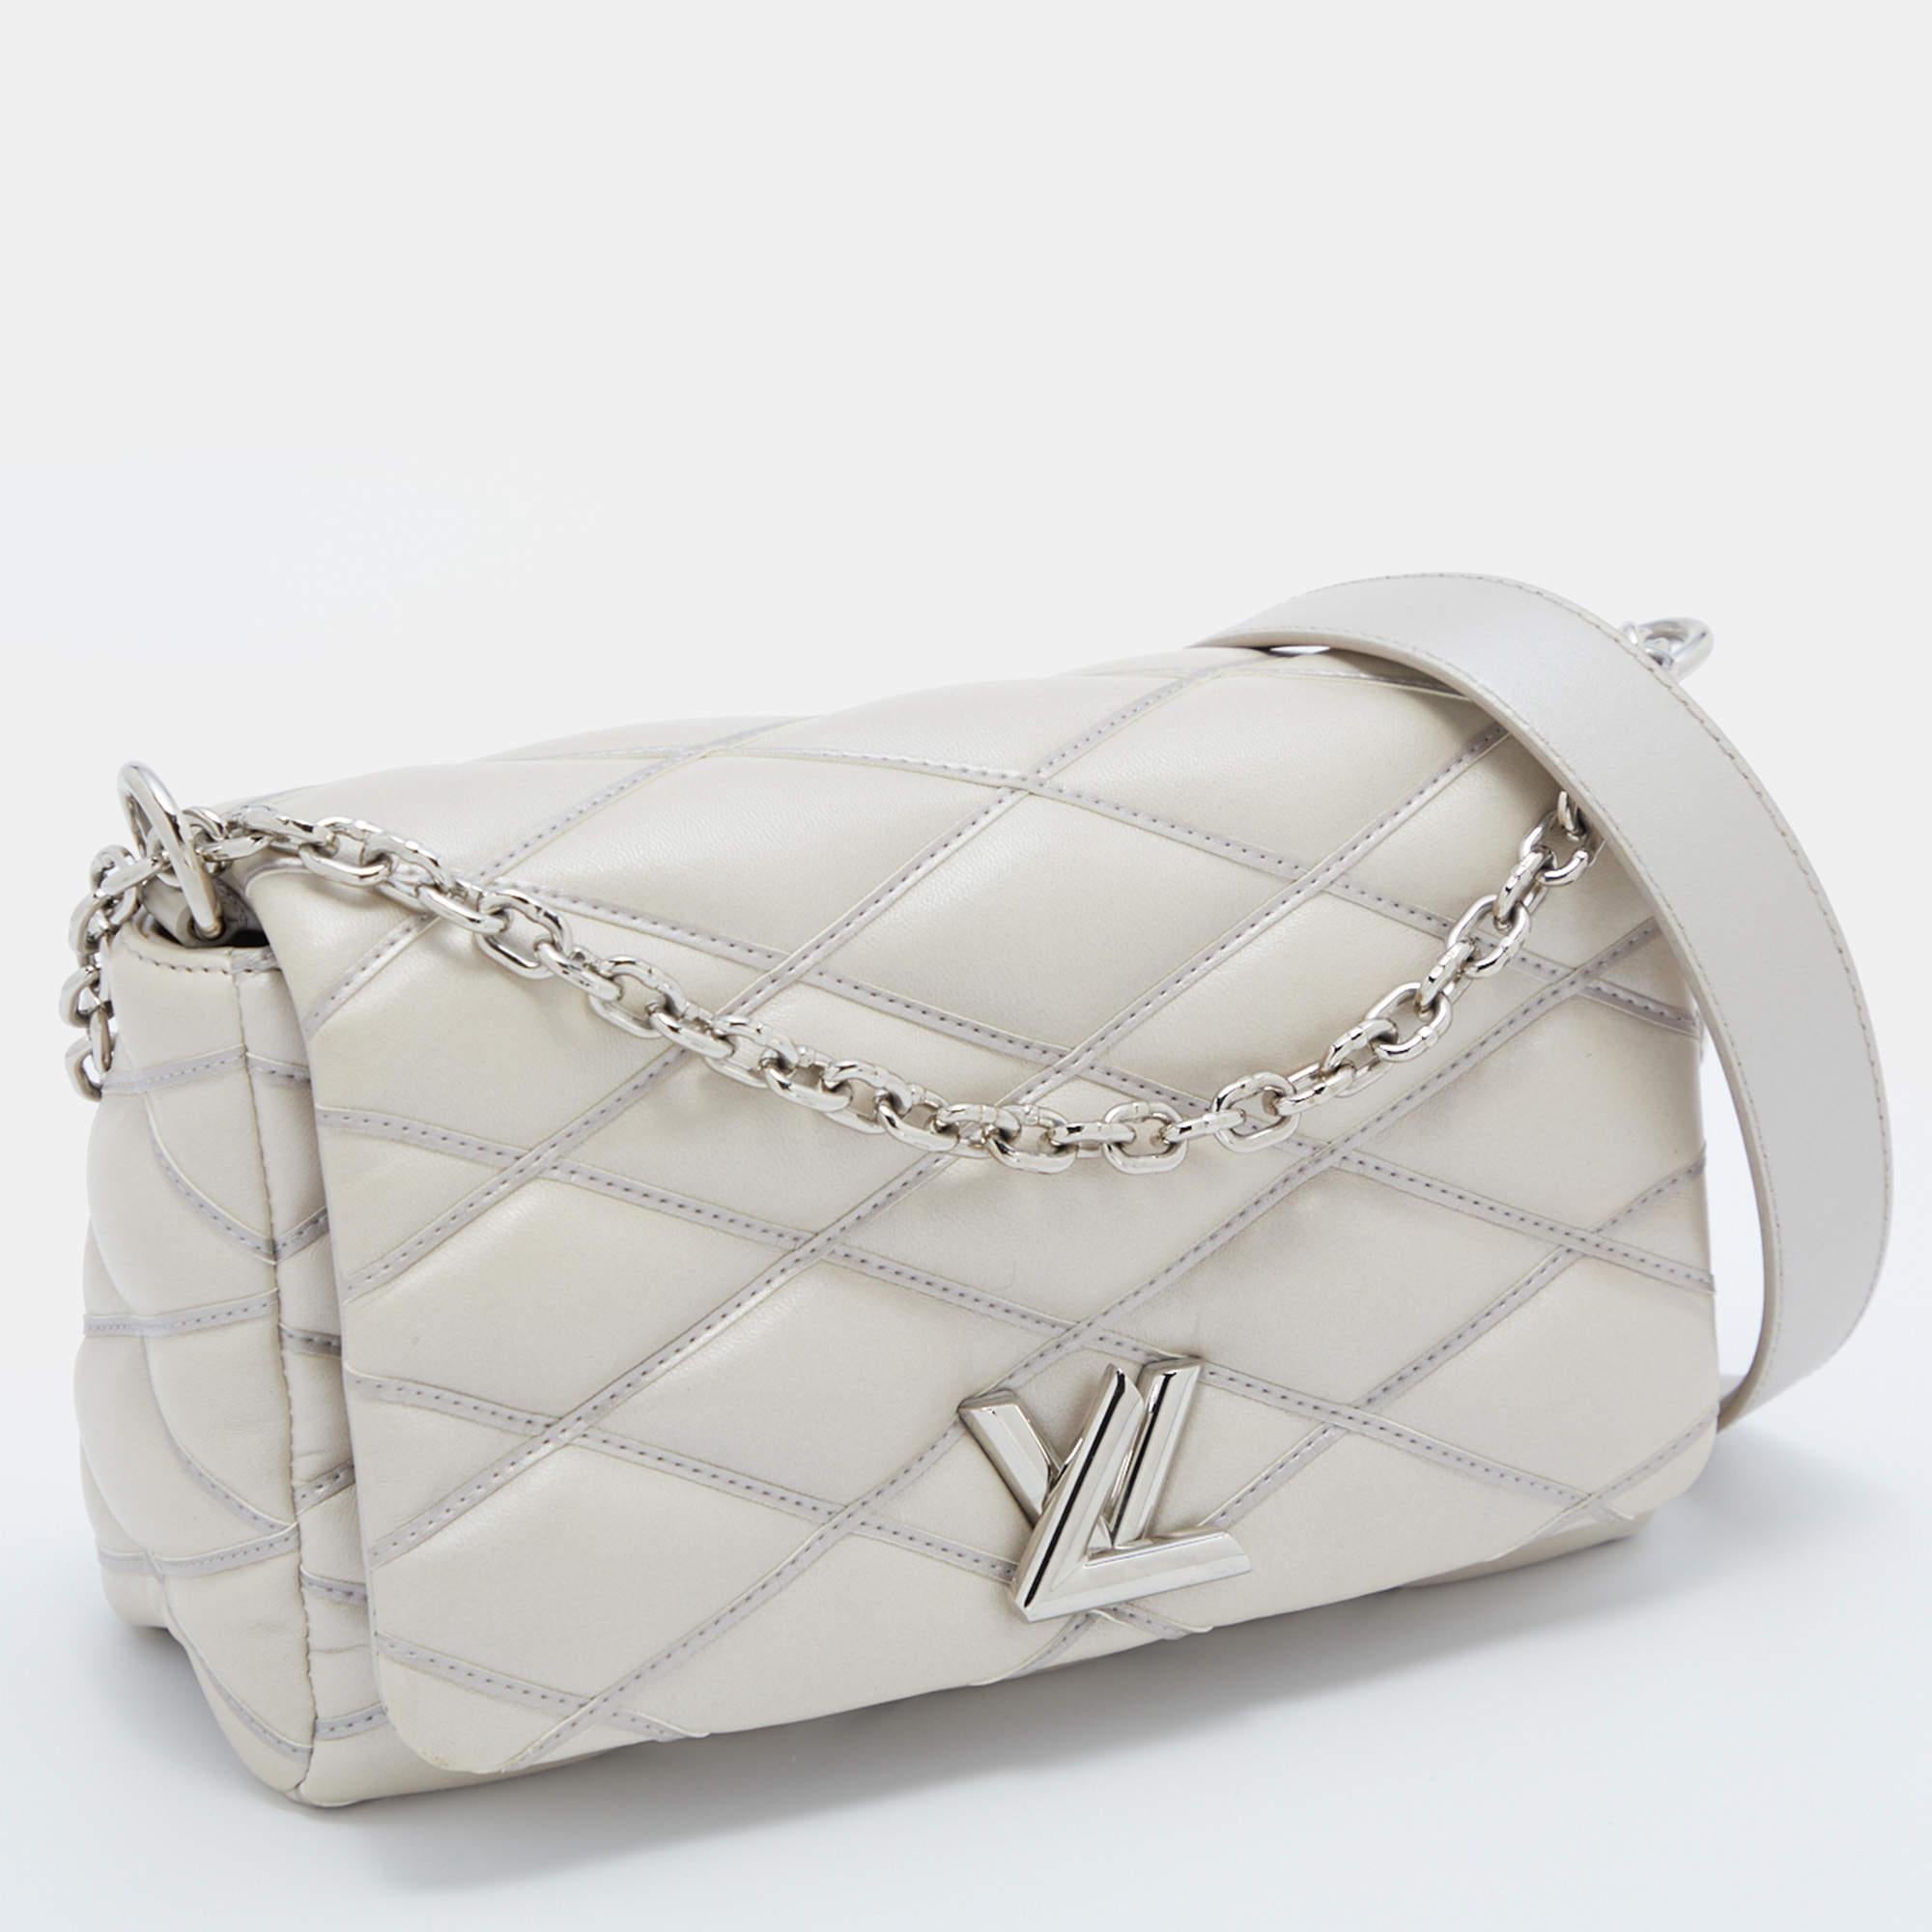 Women's Louis Vuitton Silver Quilted Lambskin Leather GO-14 Malletage PM Bag